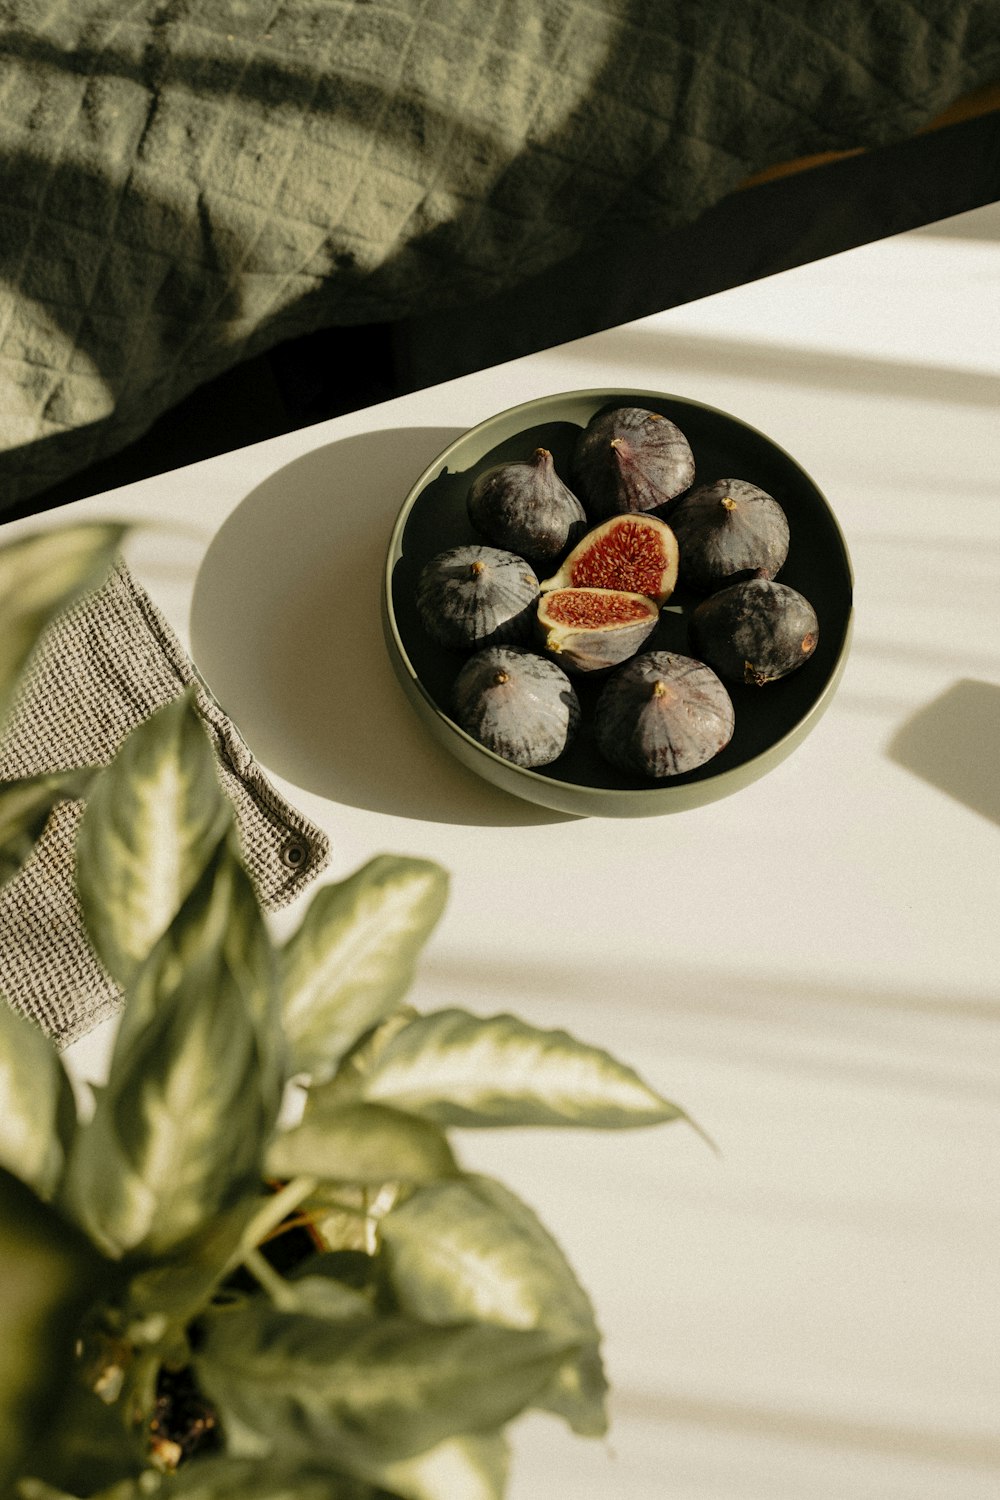 a plate of figs on a table next to a potted plant